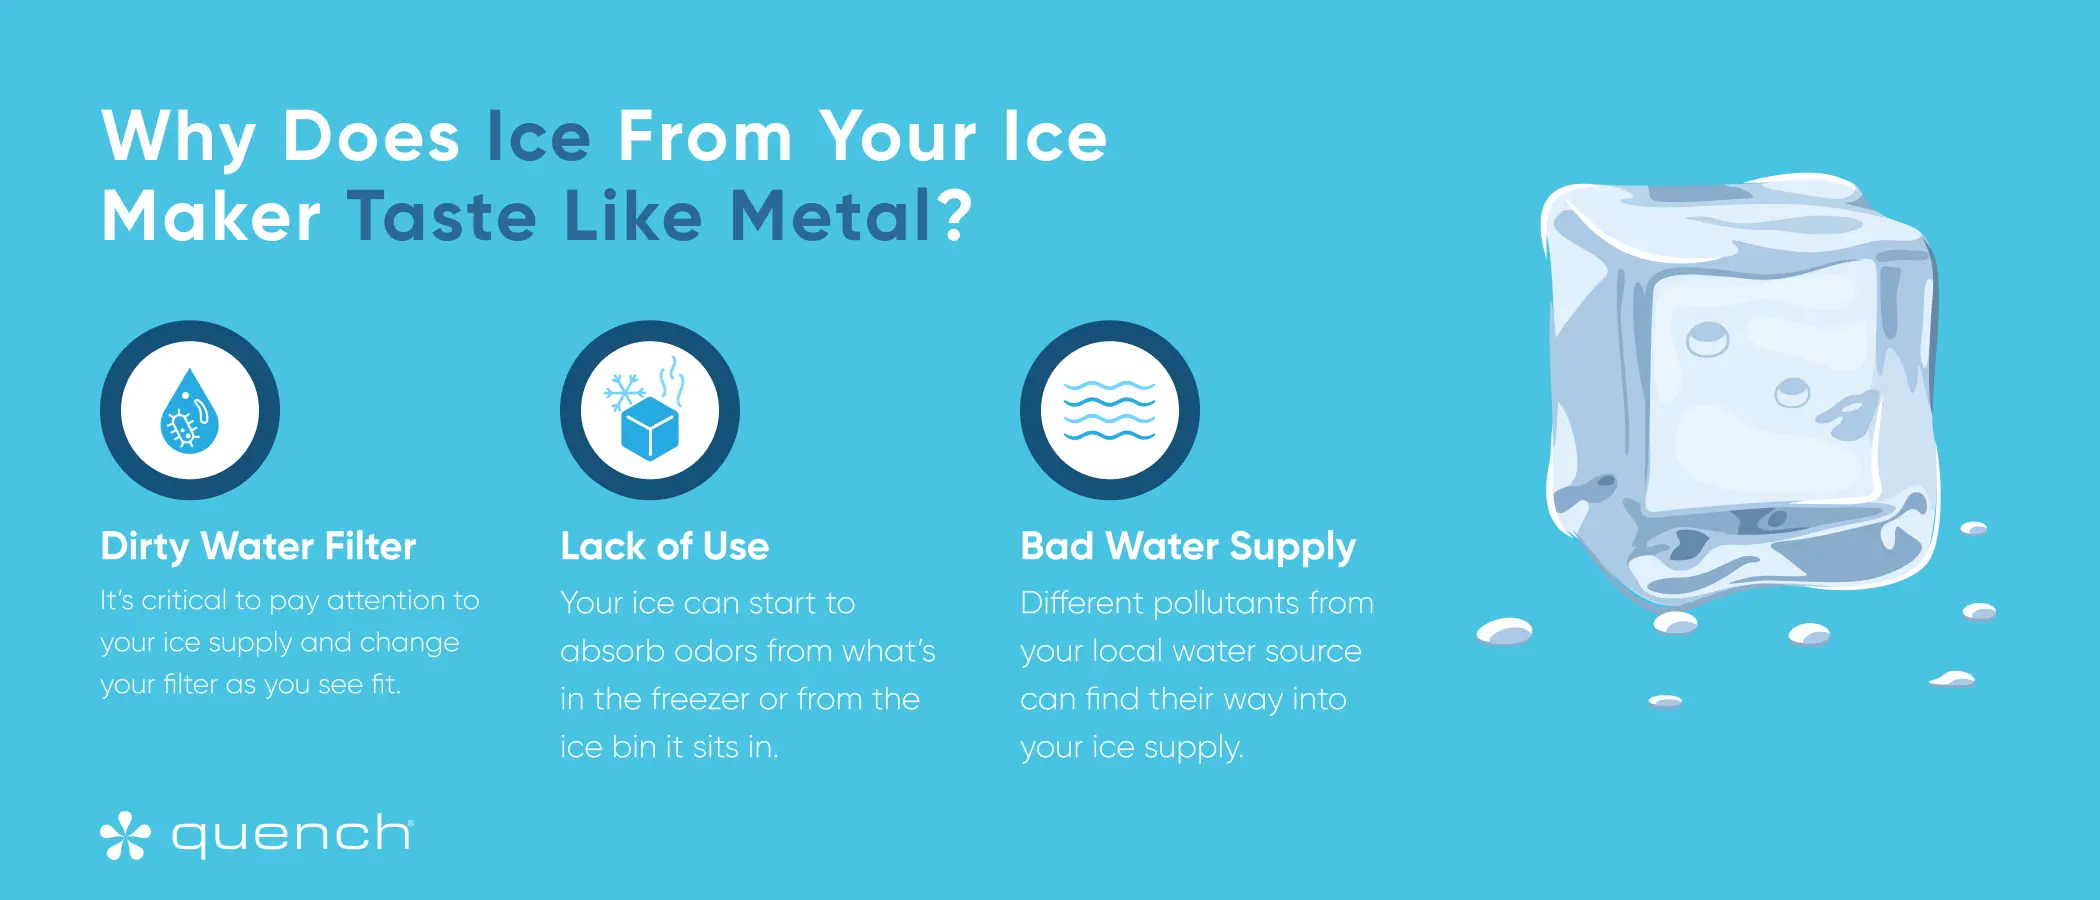 Why the Ice Maker is dispensing the wrong type of ice?